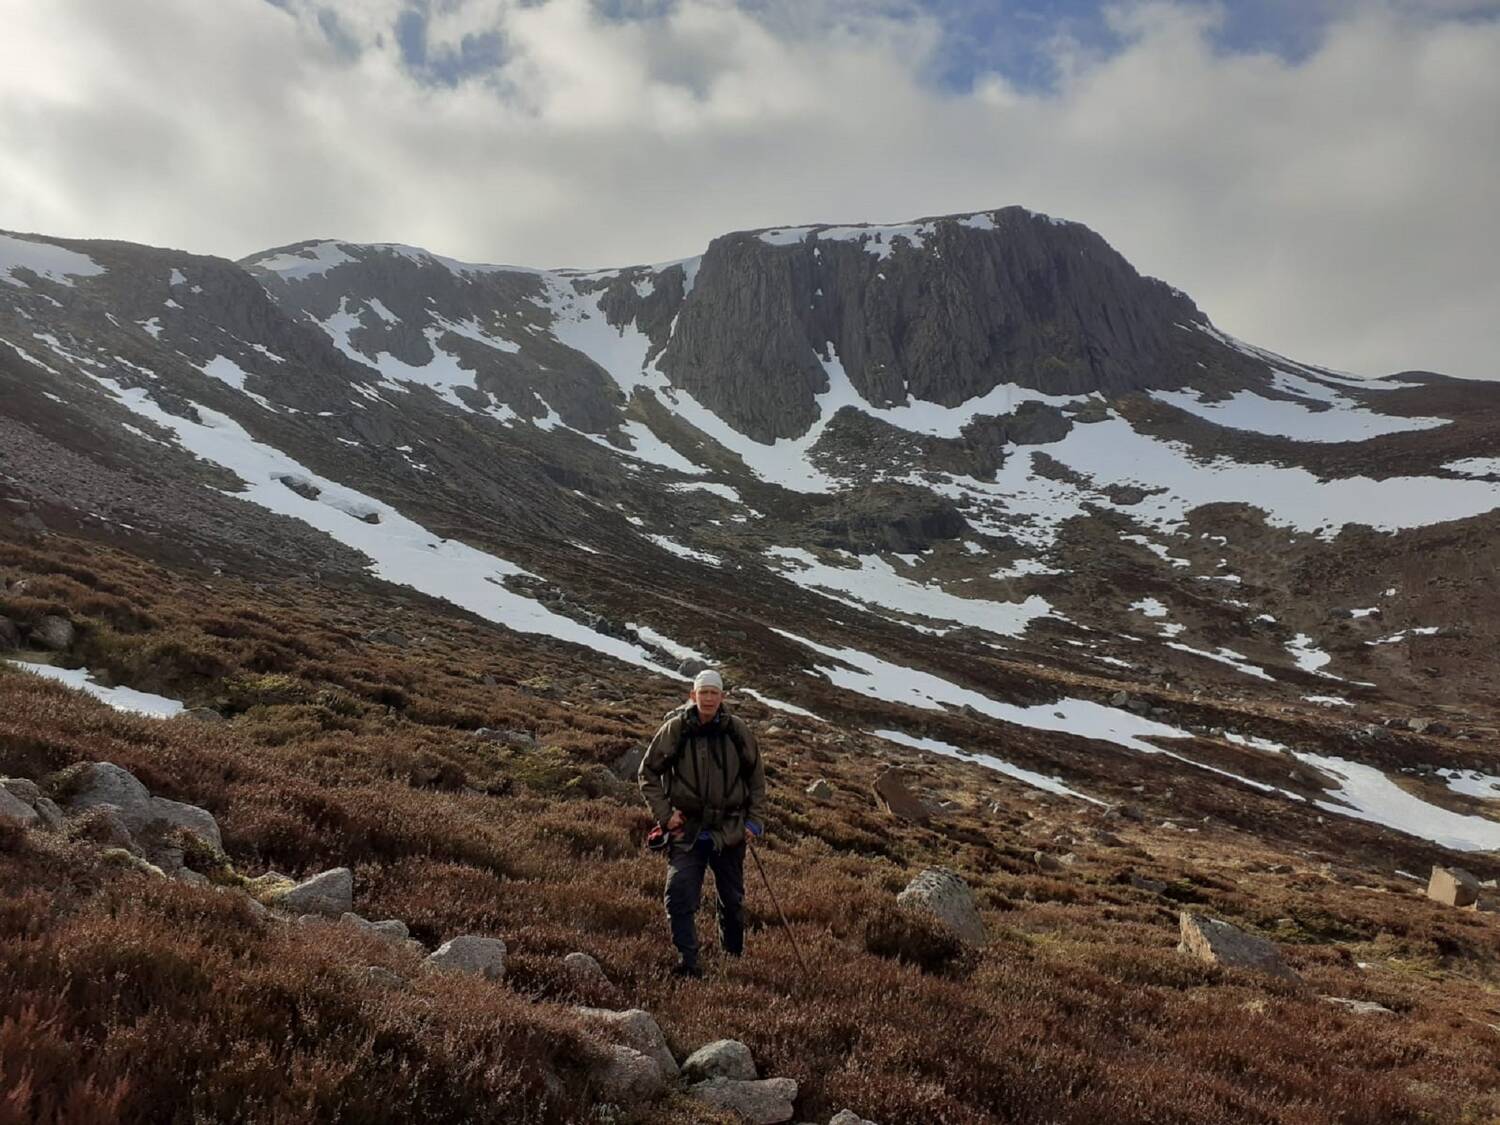 A woman stands on a heather-covered hillside strewn with boulders. Behind her is a deep wide glen and steep, snow-pocketed mountains. The sky is heavy.